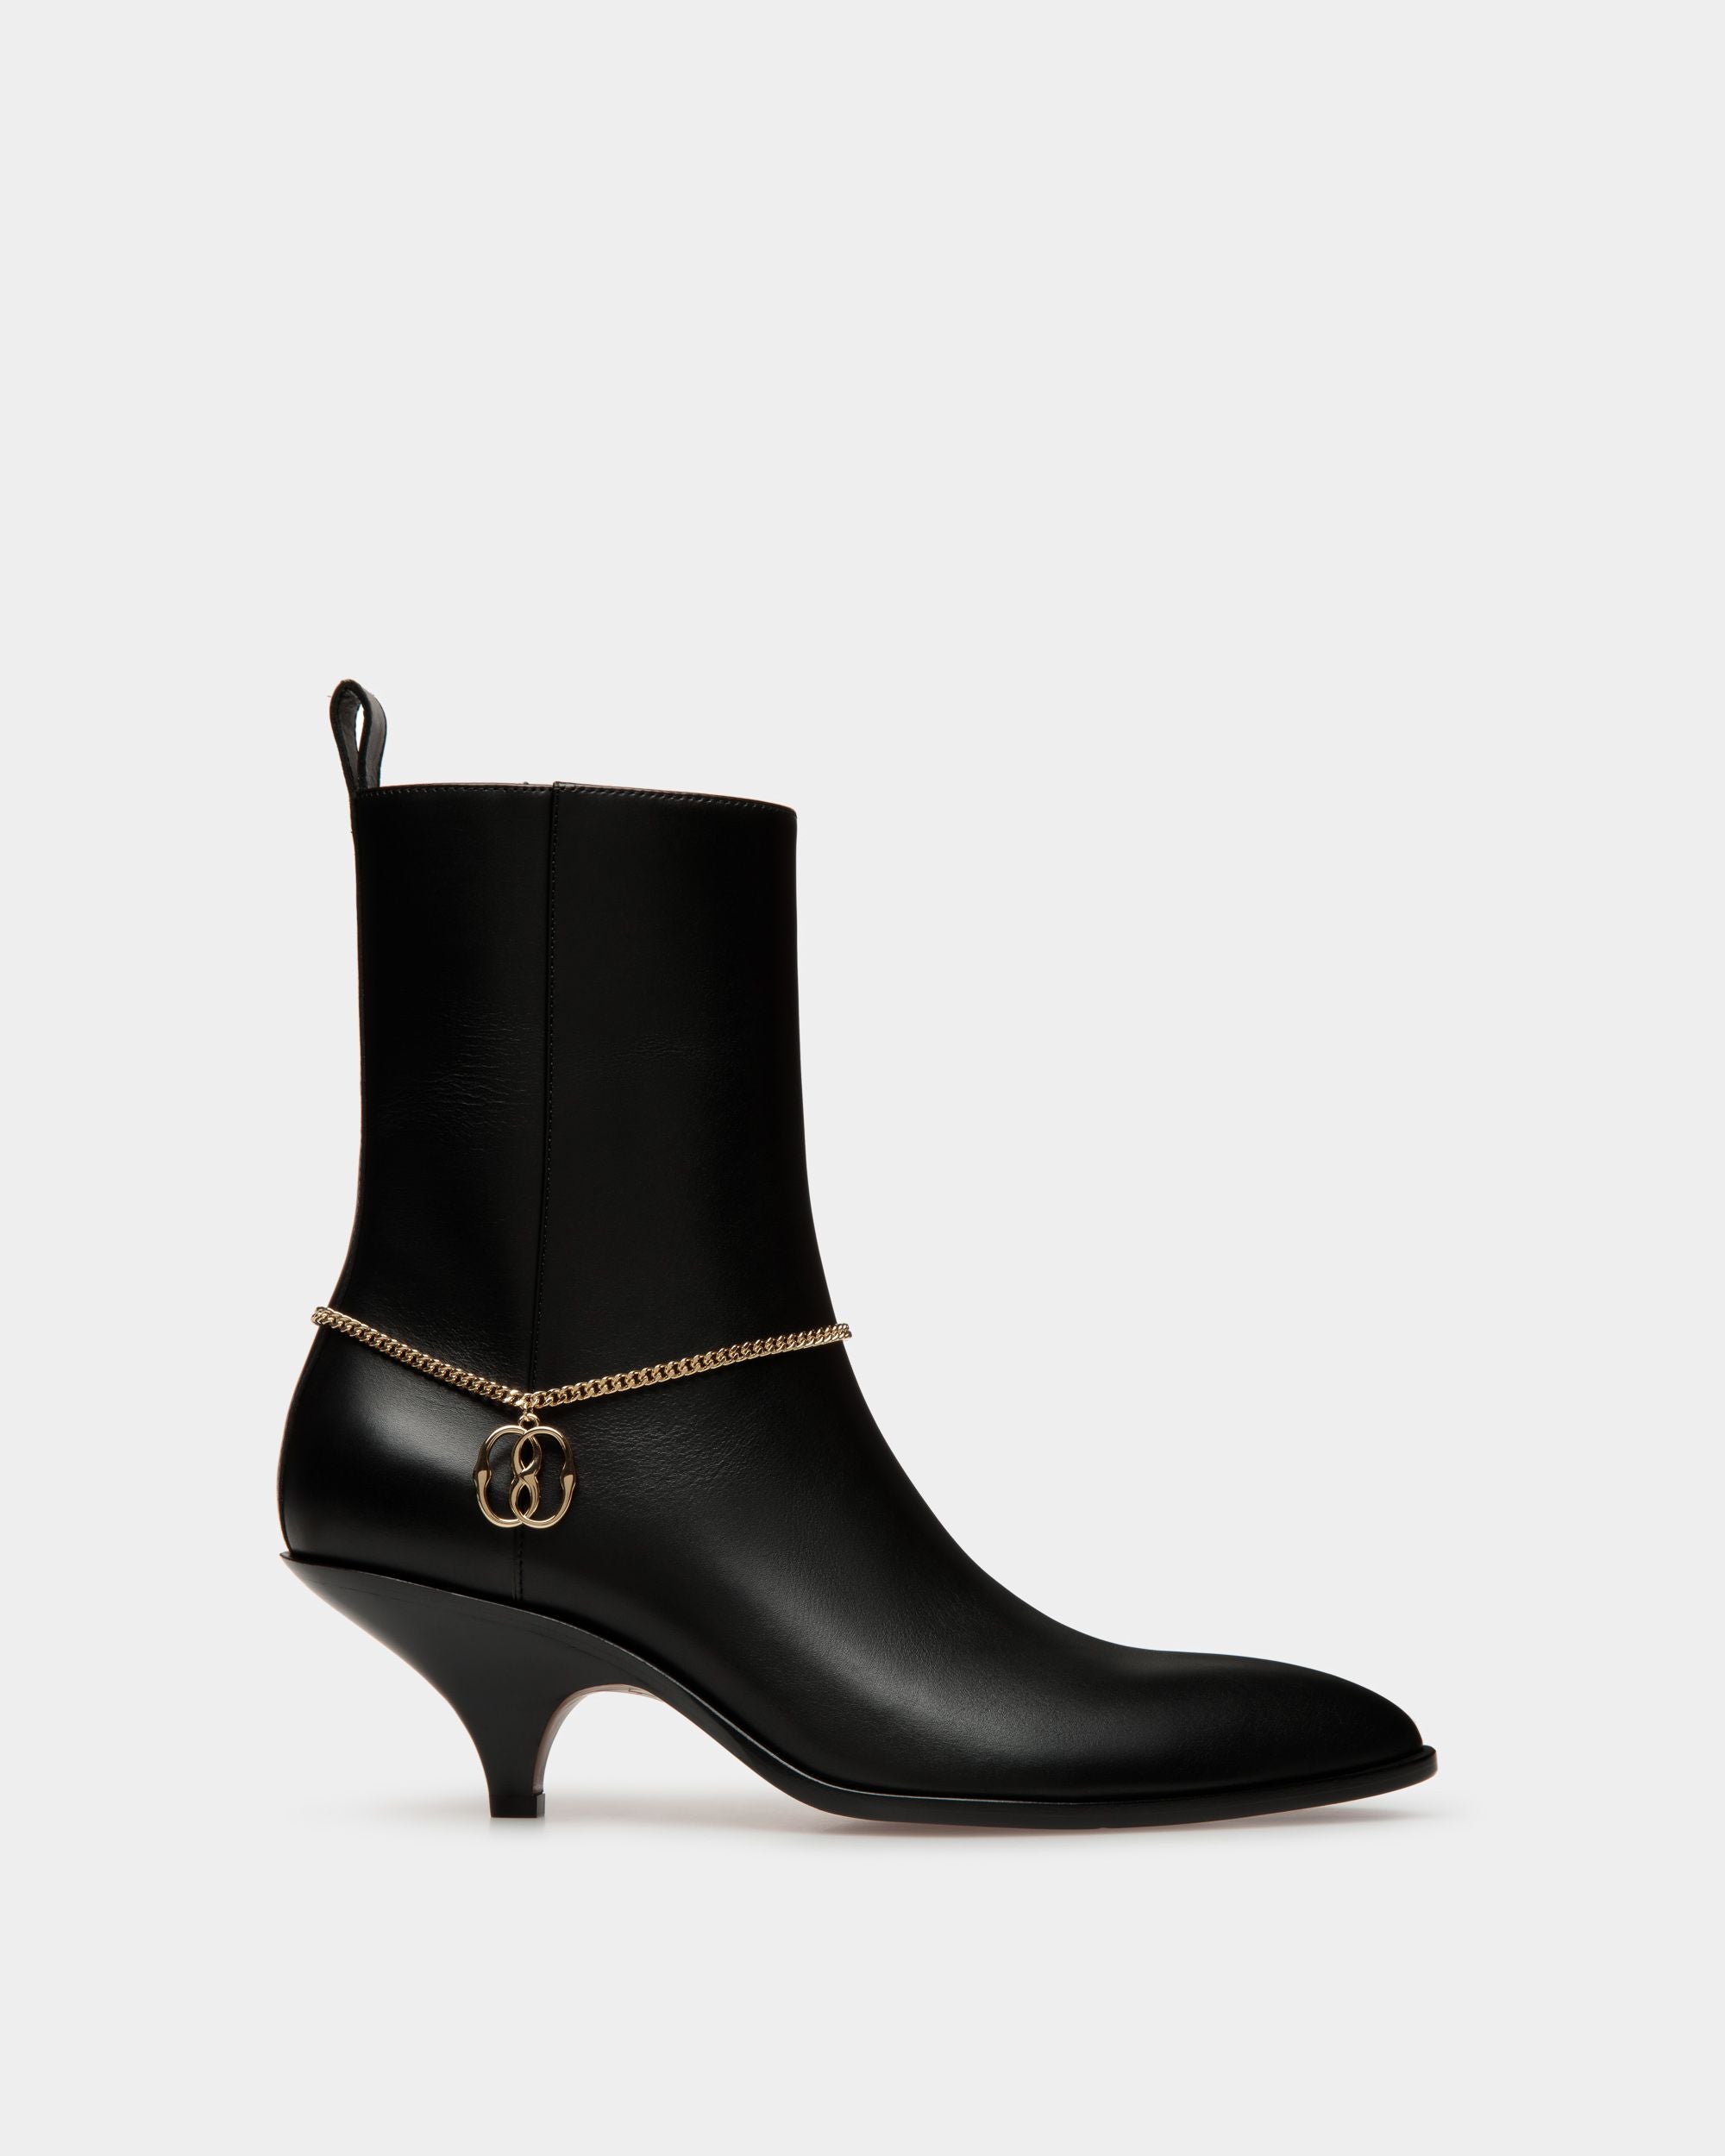 Leah | Women's Booties | Black Leather | Bally | Still Life Side